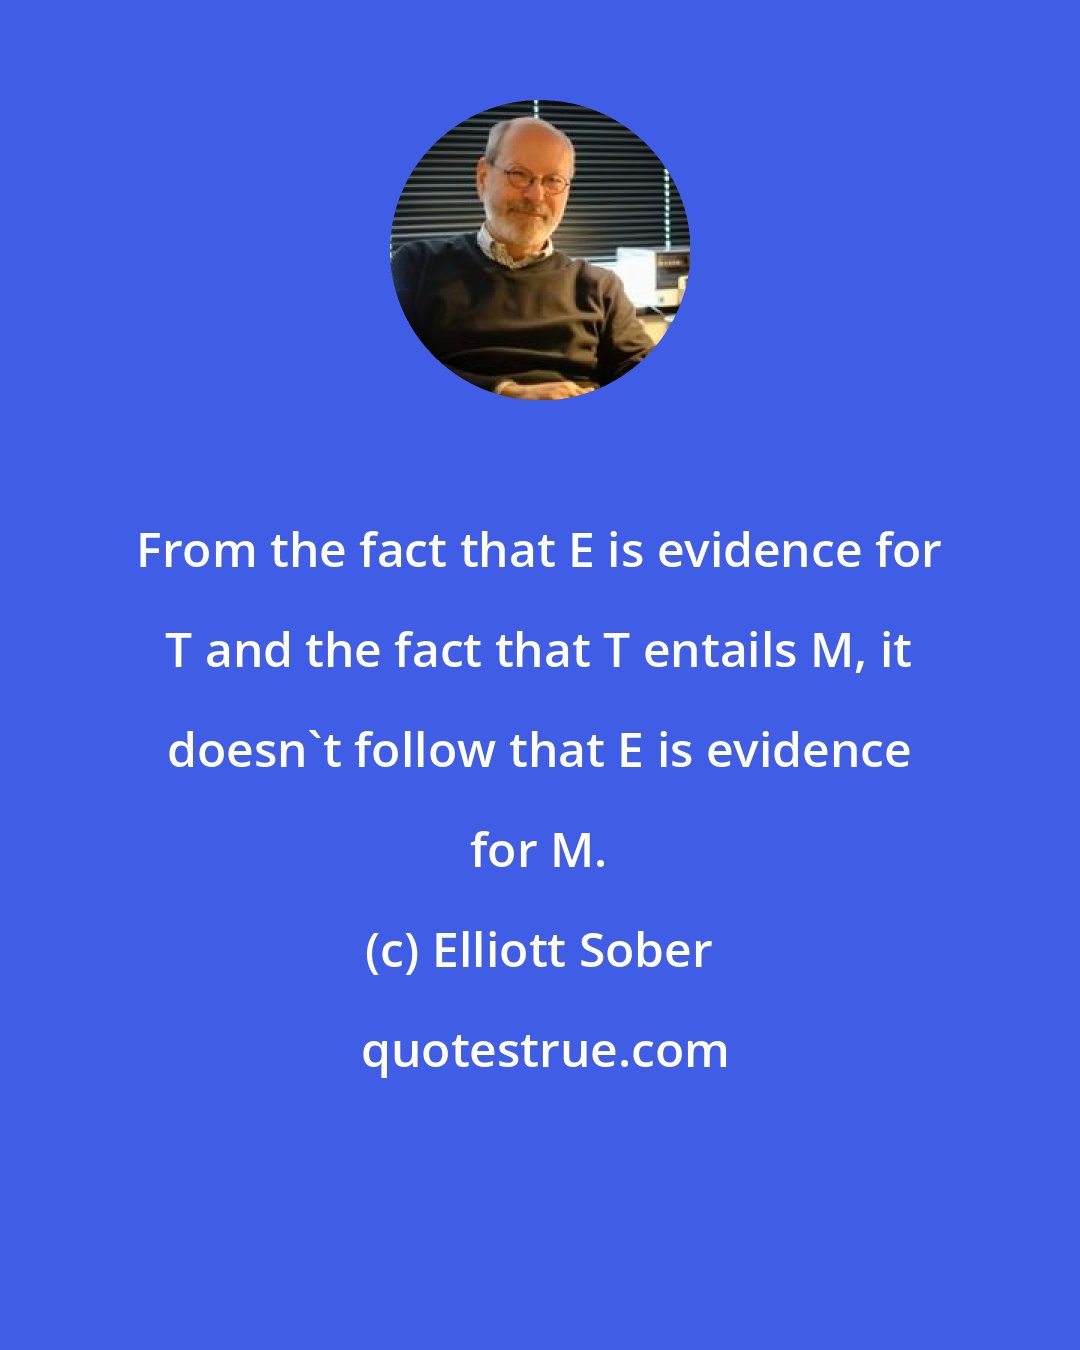 Elliott Sober: From the fact that E is evidence for T and the fact that T entails M, it doesn't follow that E is evidence for M.